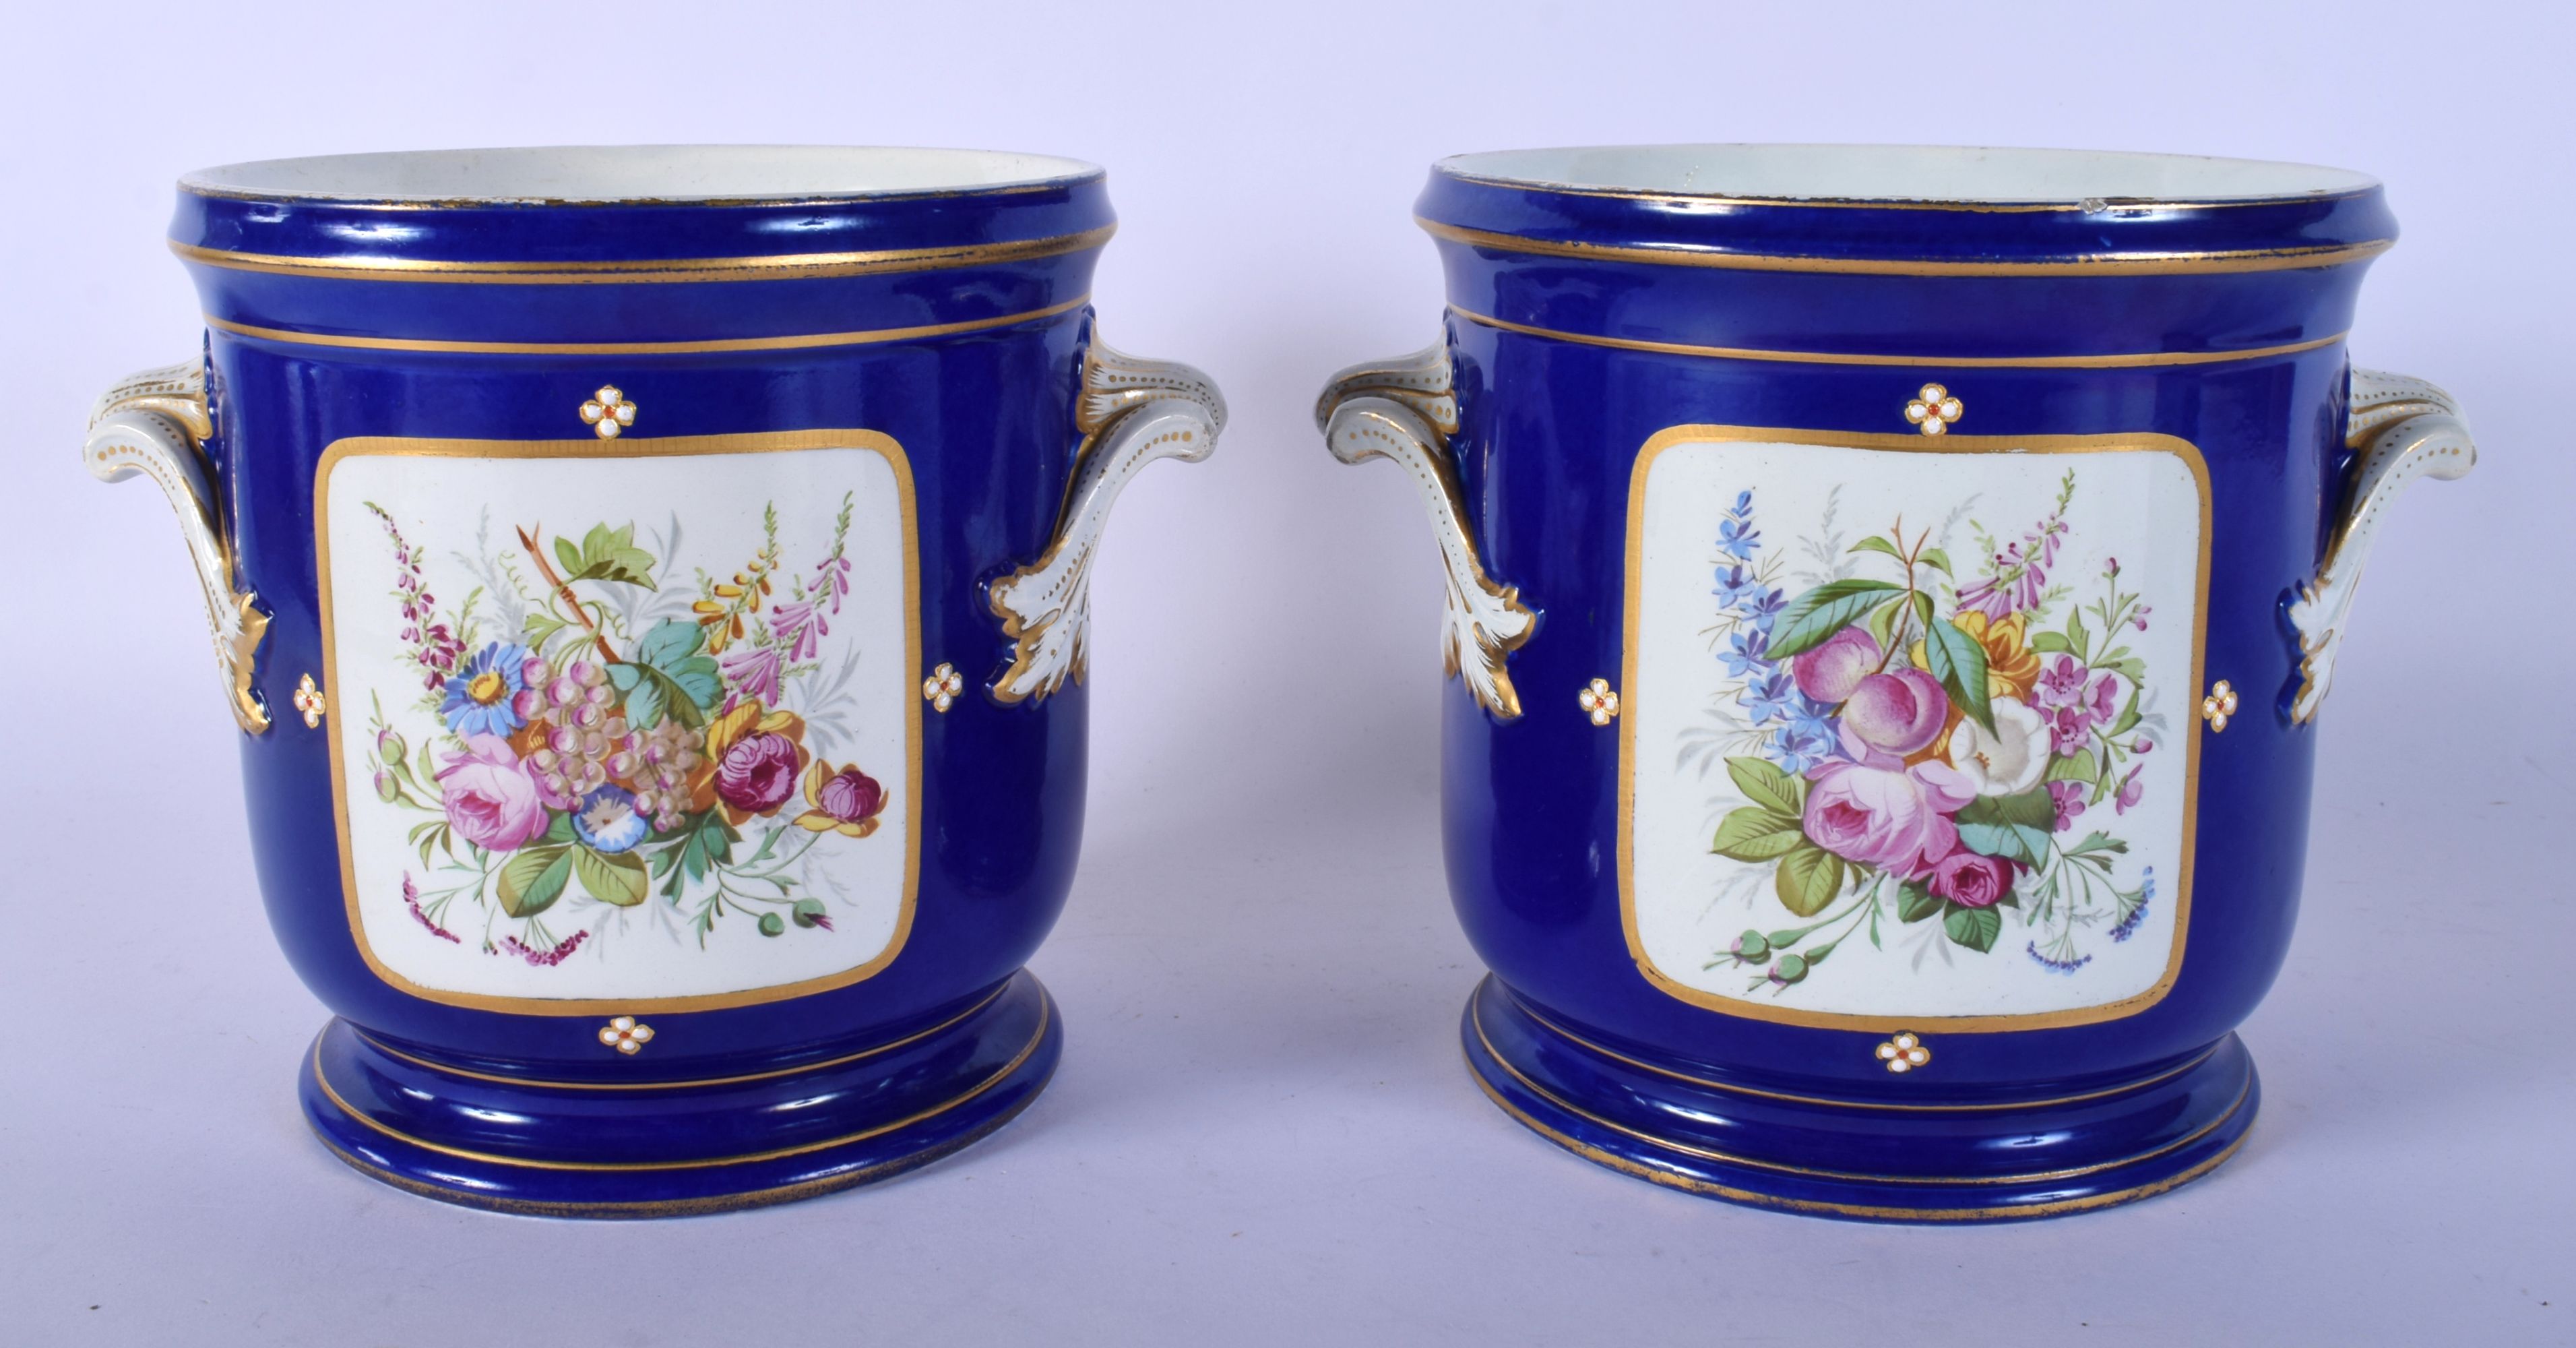 A PAIR OF 19TH CENTURY FRENCH SEVRES PORCELAIN TWIN HANDLE CACHE POT painted with lovers in landscap - Image 3 of 6